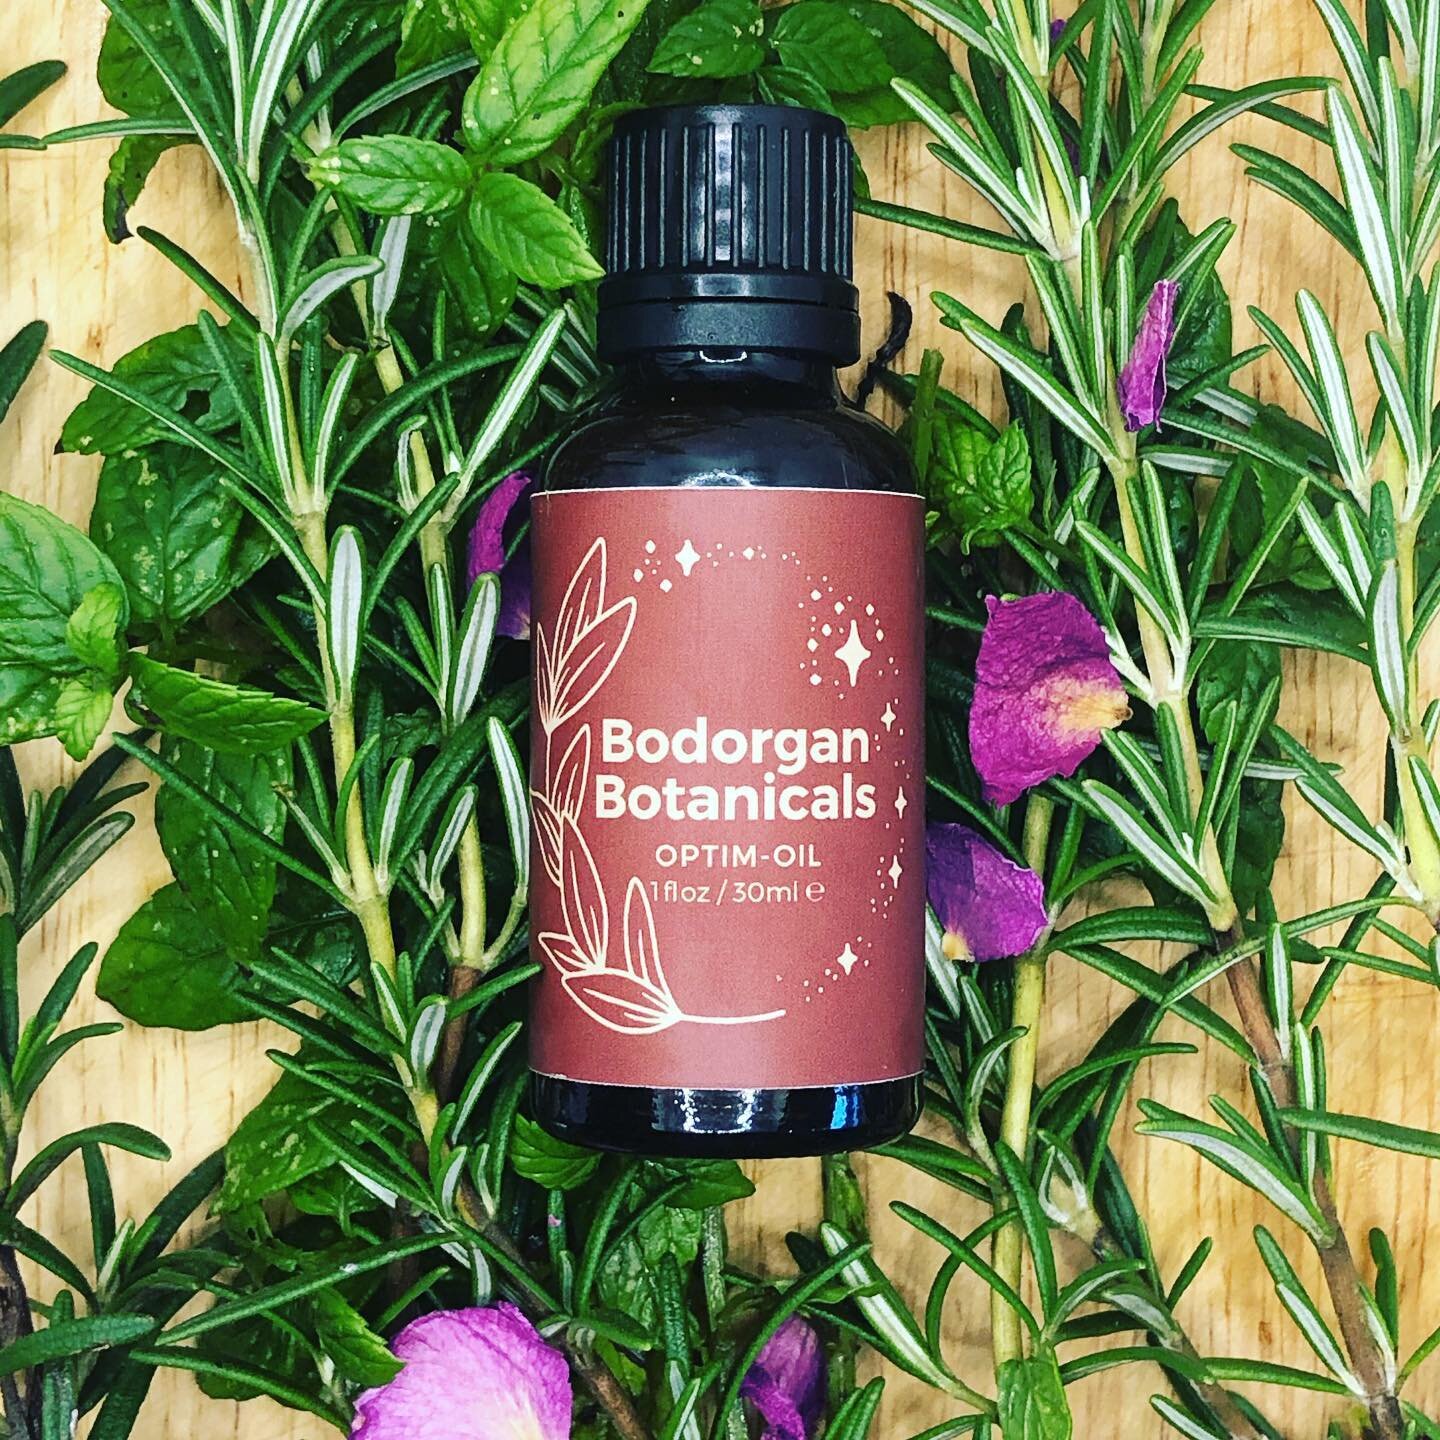 Just one of the gorgeous botanical treats you&rsquo;ll find in the beautiful immune-boosting wellness boxes @vigour_wellness - Optim-oil, from our little sister venture @bodorganbotanicals - a revitalising infused oil made with botanicals from the @p